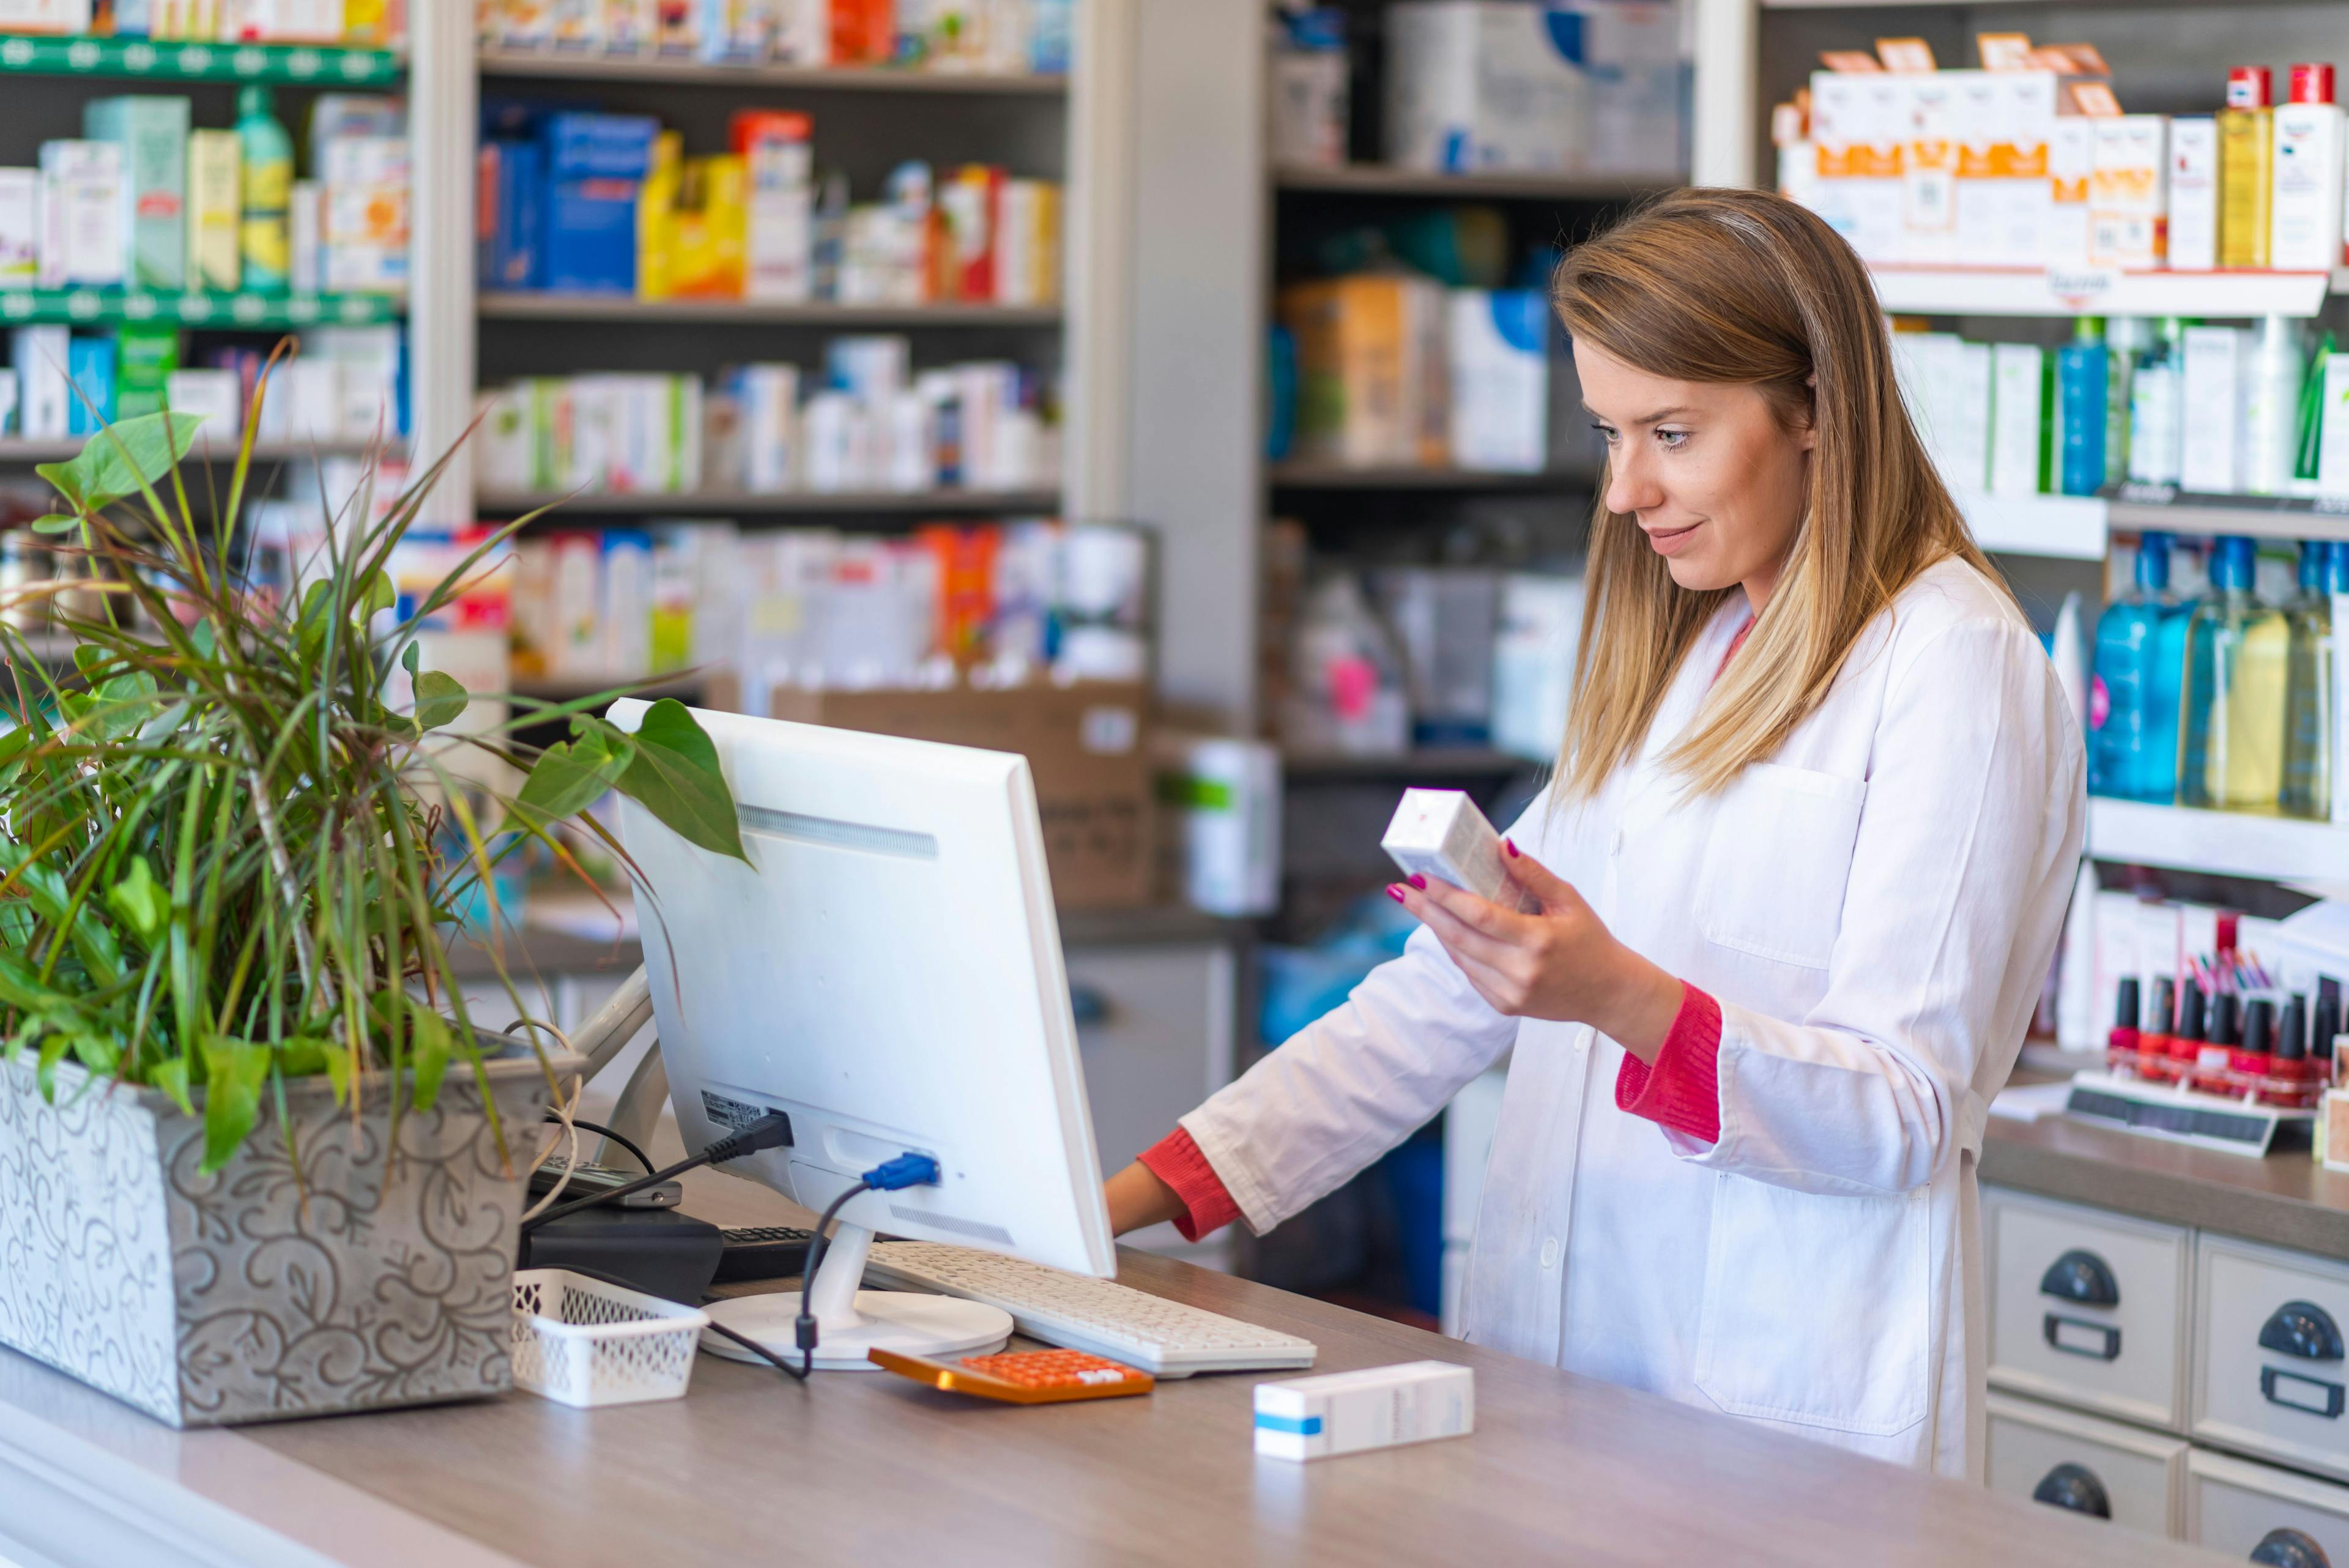 Portrait of young female pharmacist holding medication while using computer at pharmacy counter | Image Credit: Dragana Gordic - stock.adobe.com